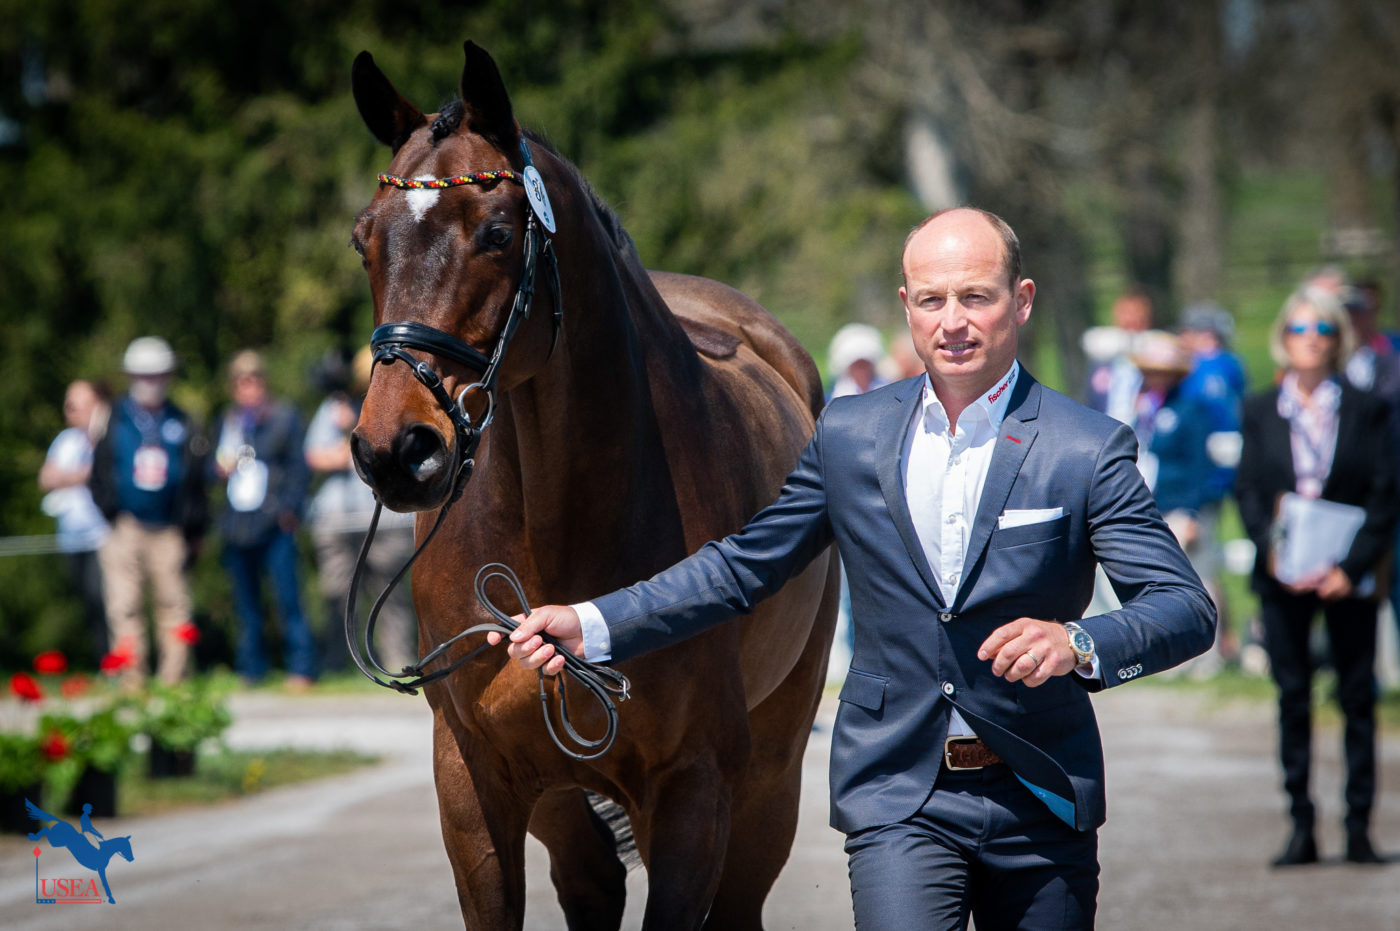 All Horses Accepted at the 2022 LRK3DE CCI5*-L First Horse Inspection